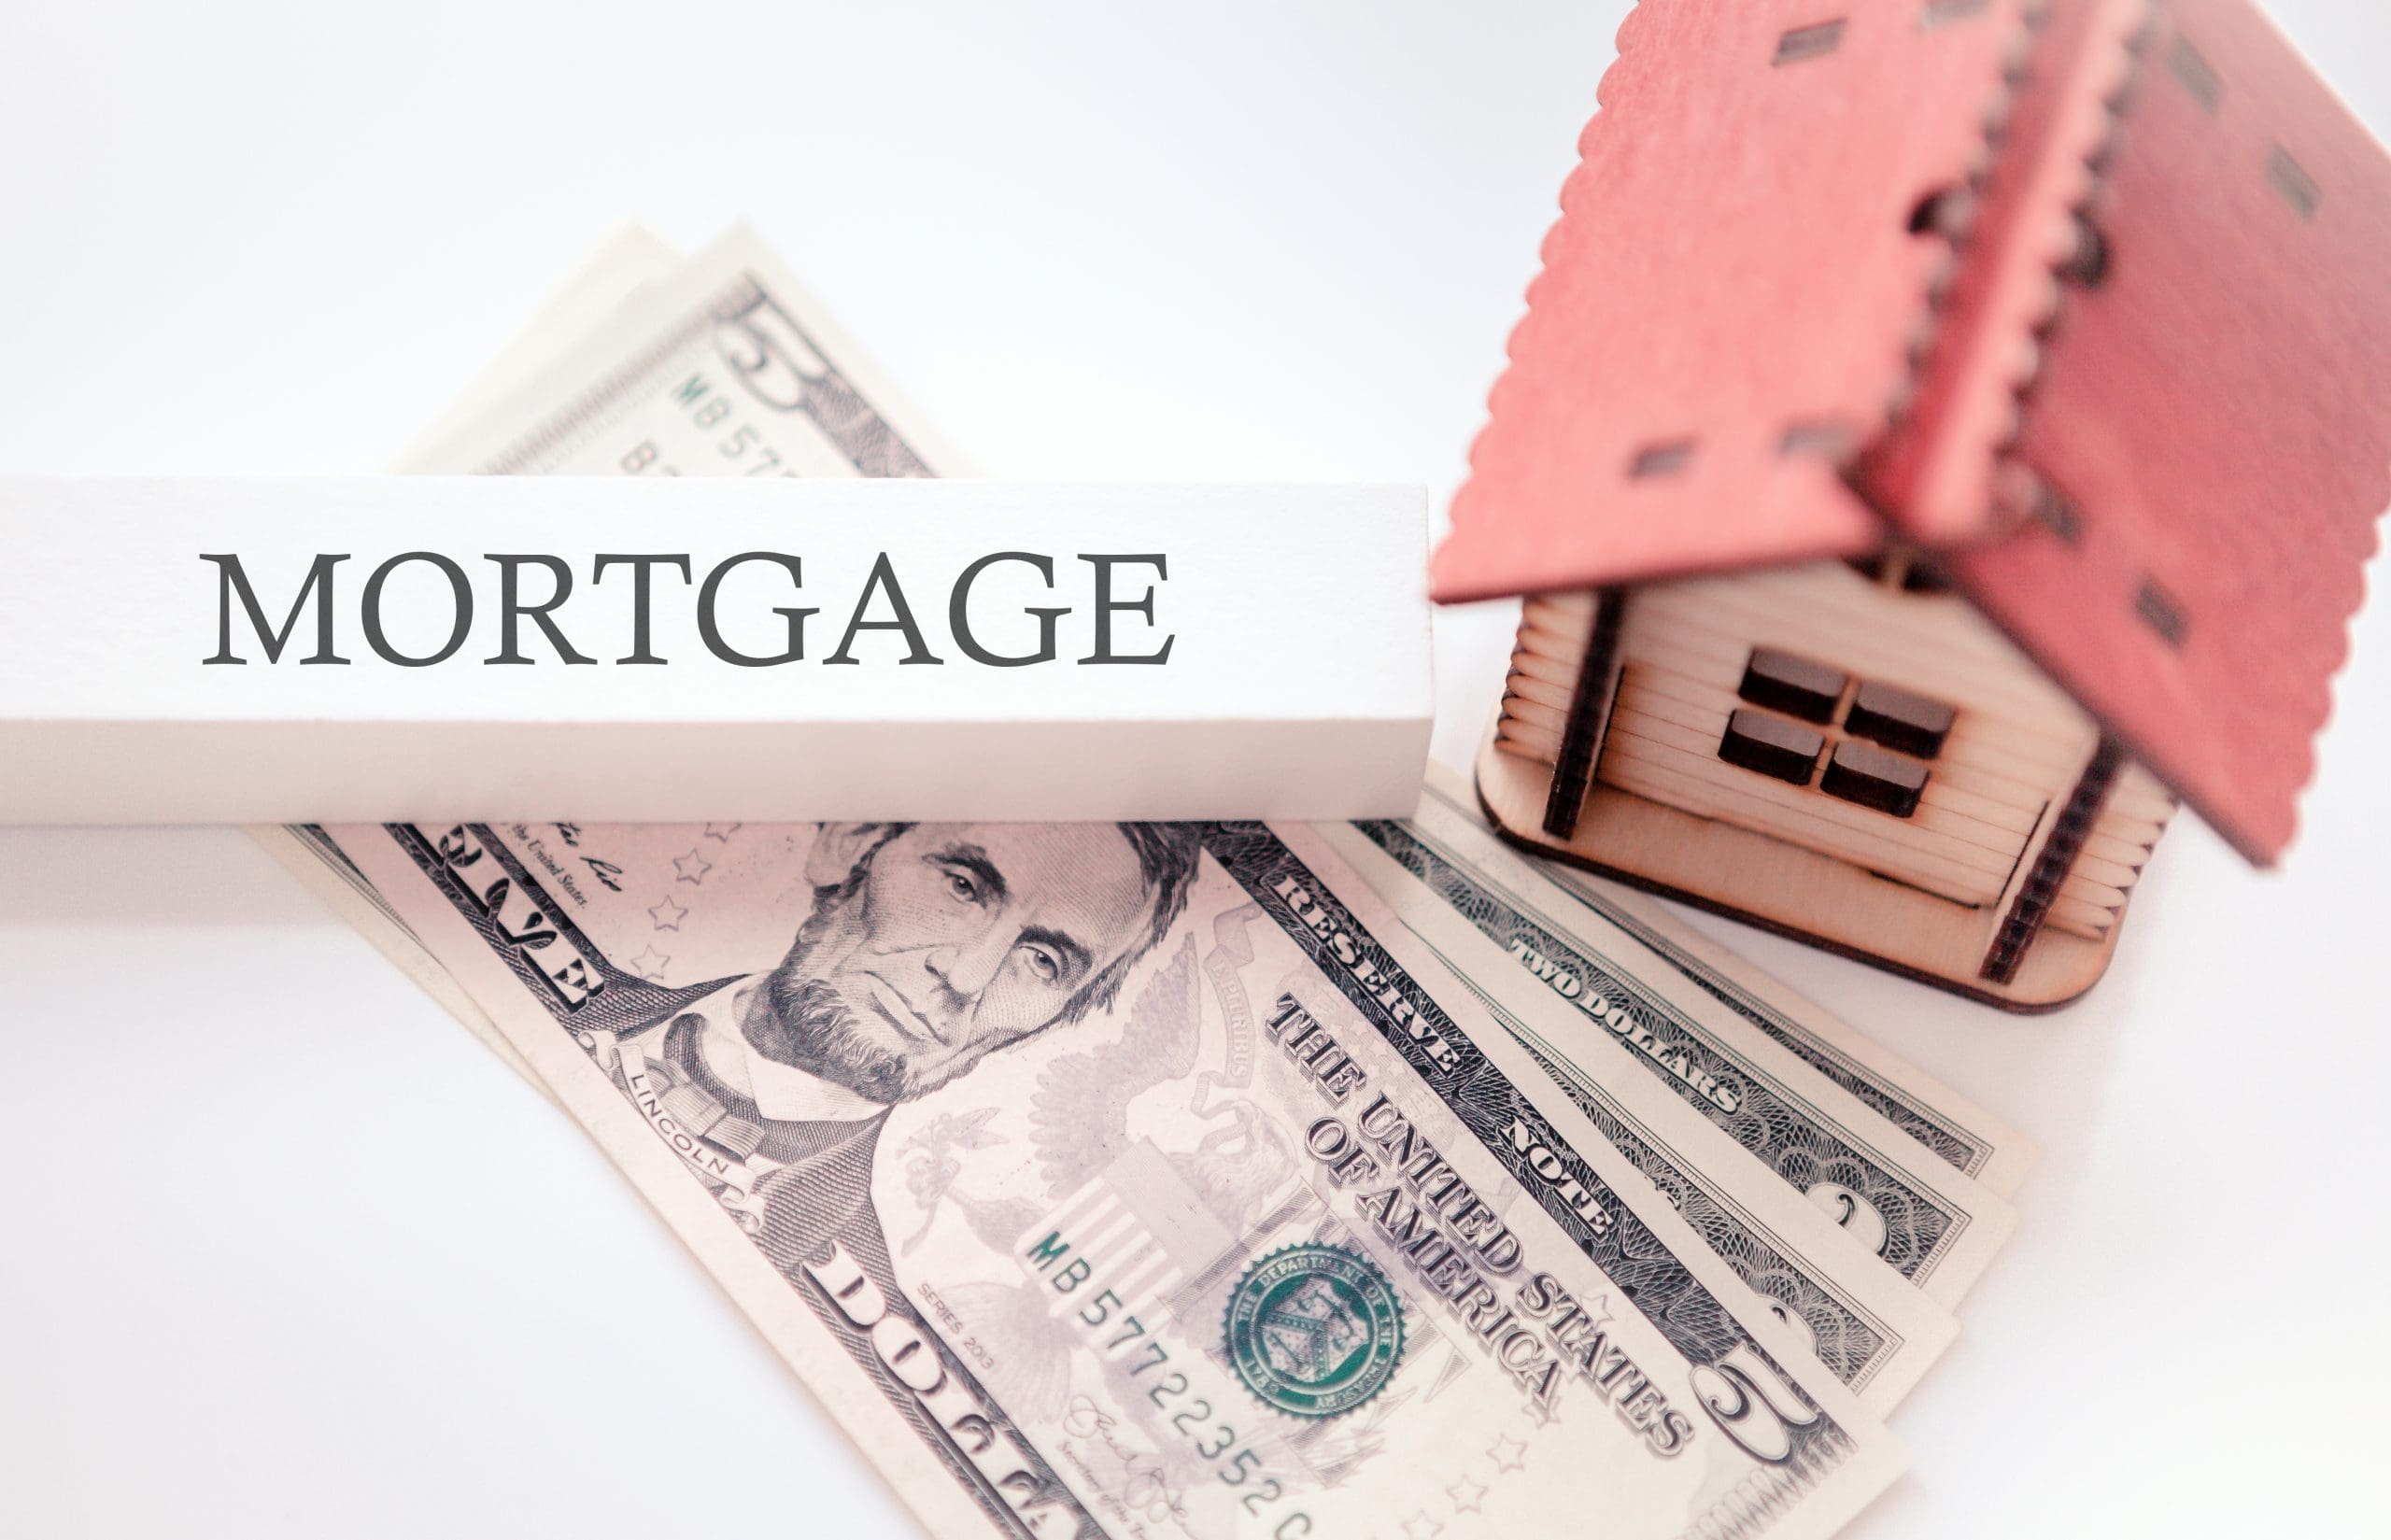 4 Proven Ways to Reduce Mortgage Costs